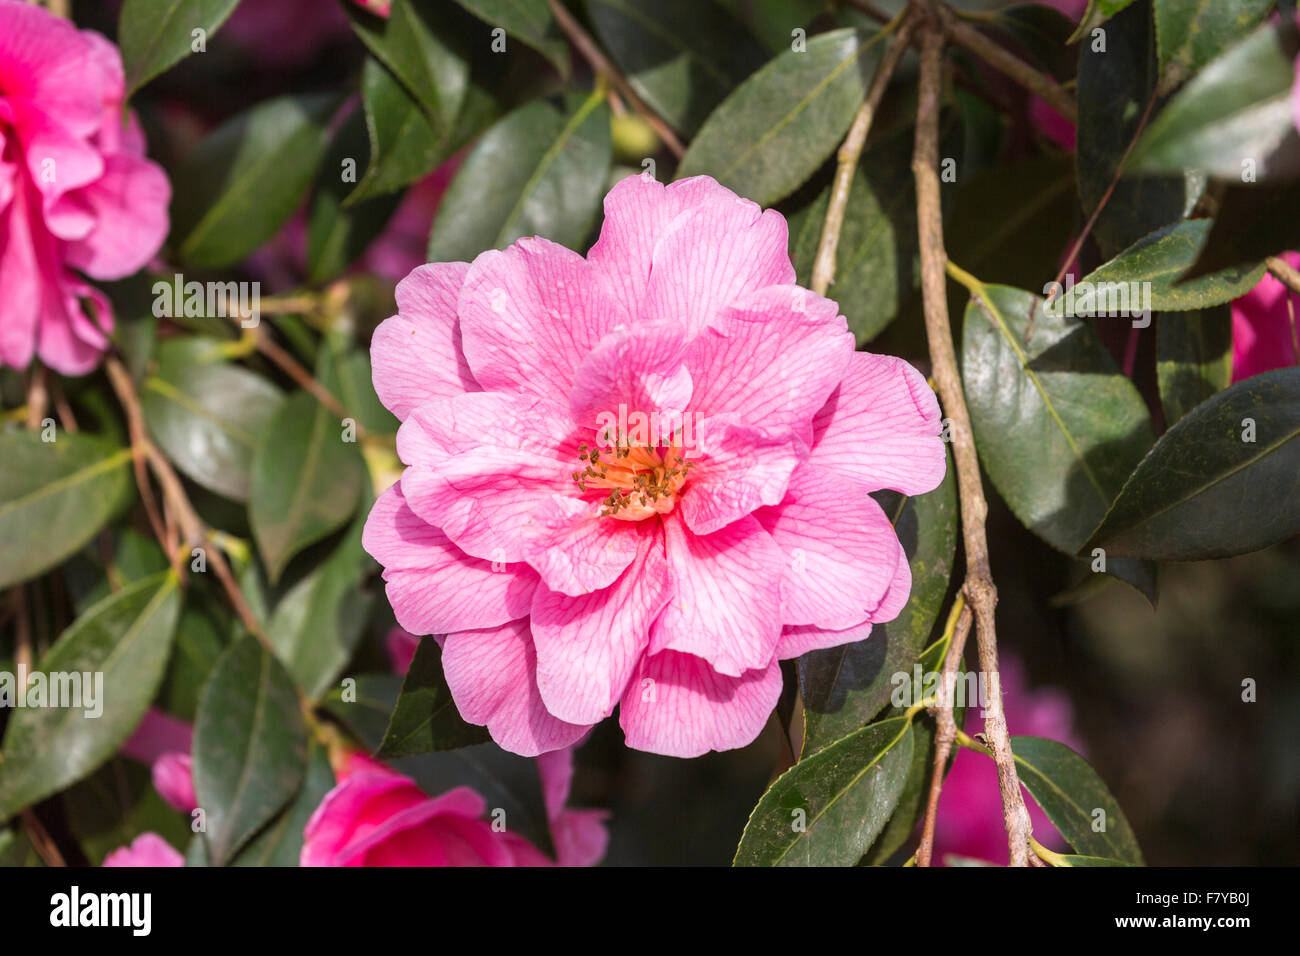 Pink camellia x williamsii 'Donation' flowering in spring at RHS Gardens Wisley Surrey, England, UK Stock Photo